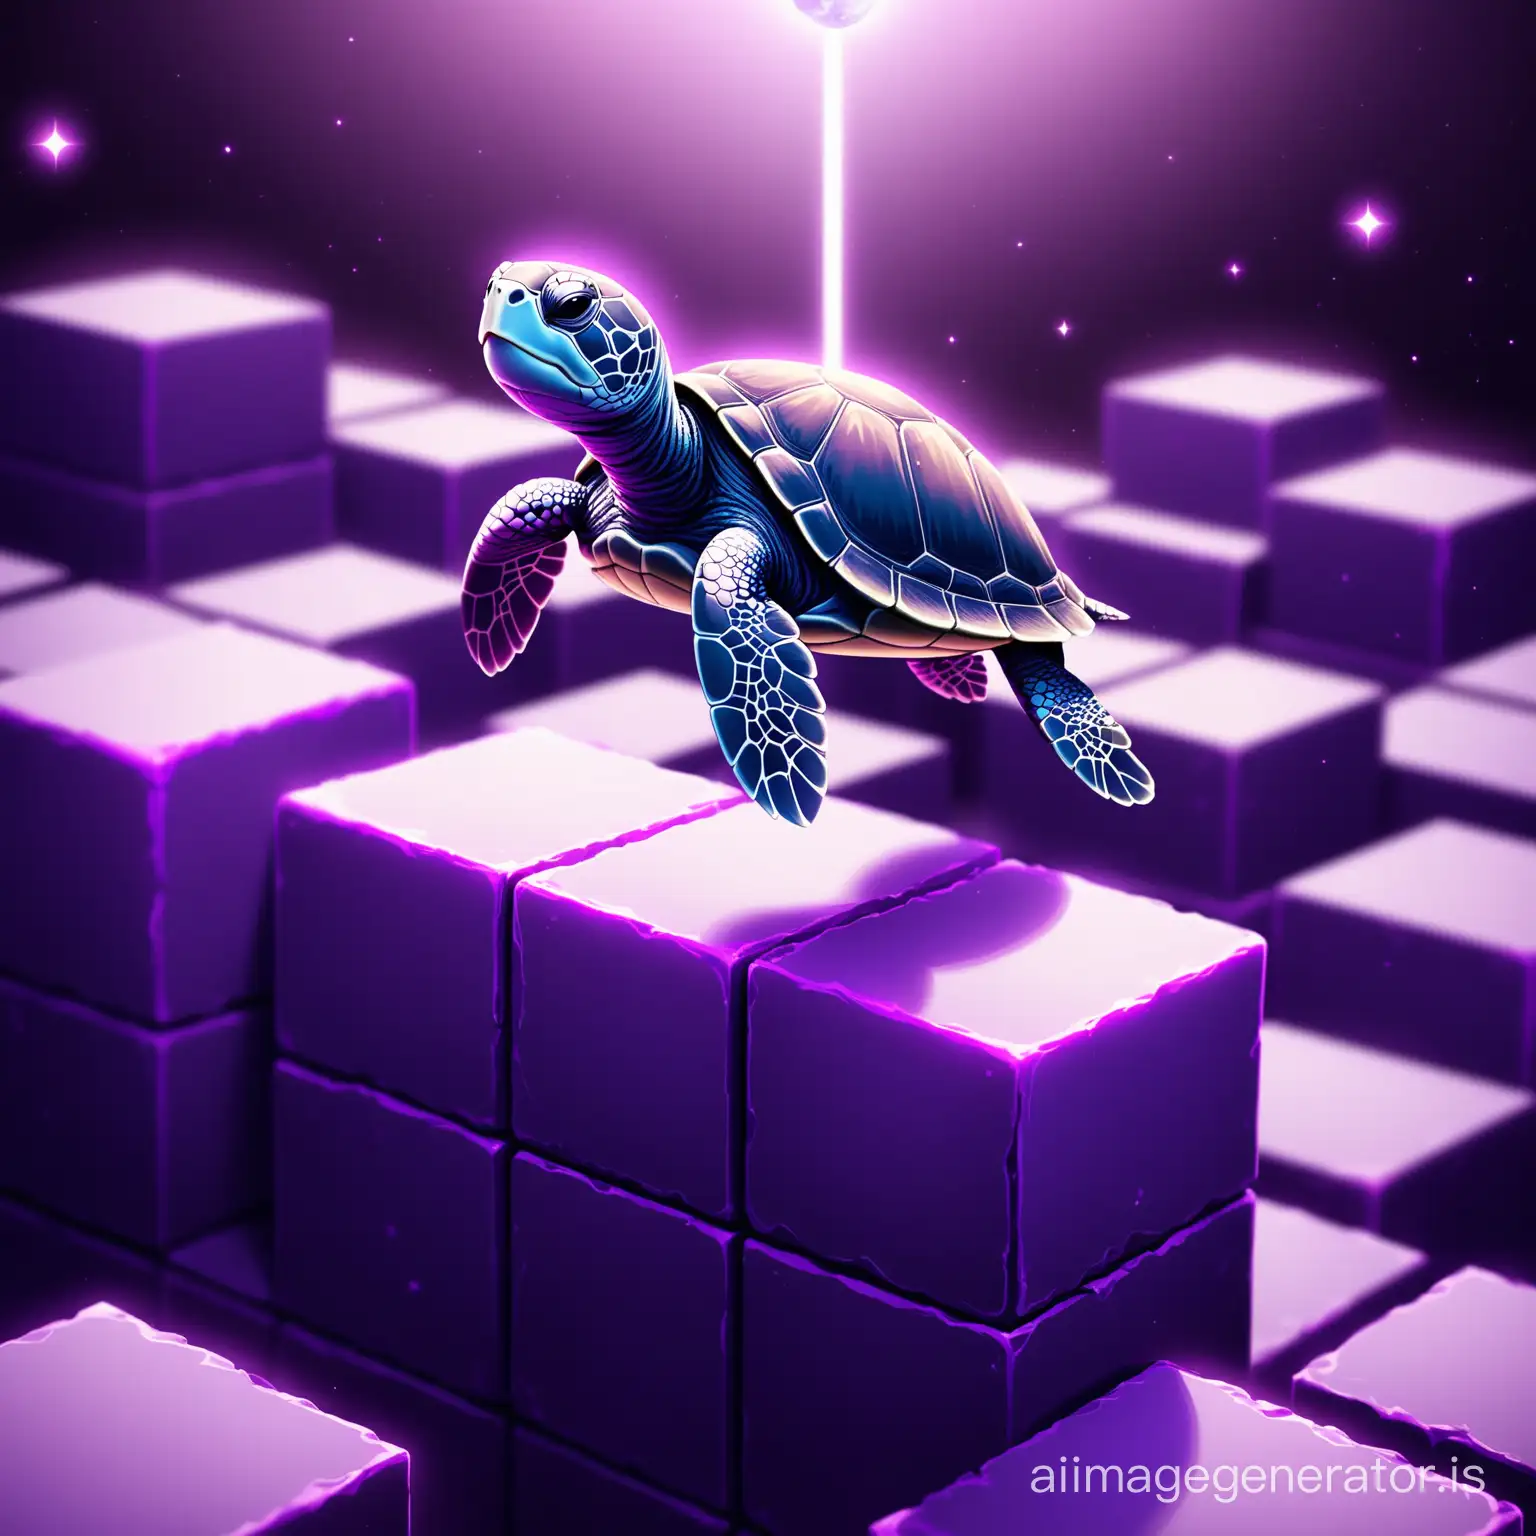 A little cute turtle flying on the purple block earth with super detail and High Quality
big and Purple and floating blocks are seen everywhere
Details are evident beautifully and with great precision
Lighting is carefully observed
